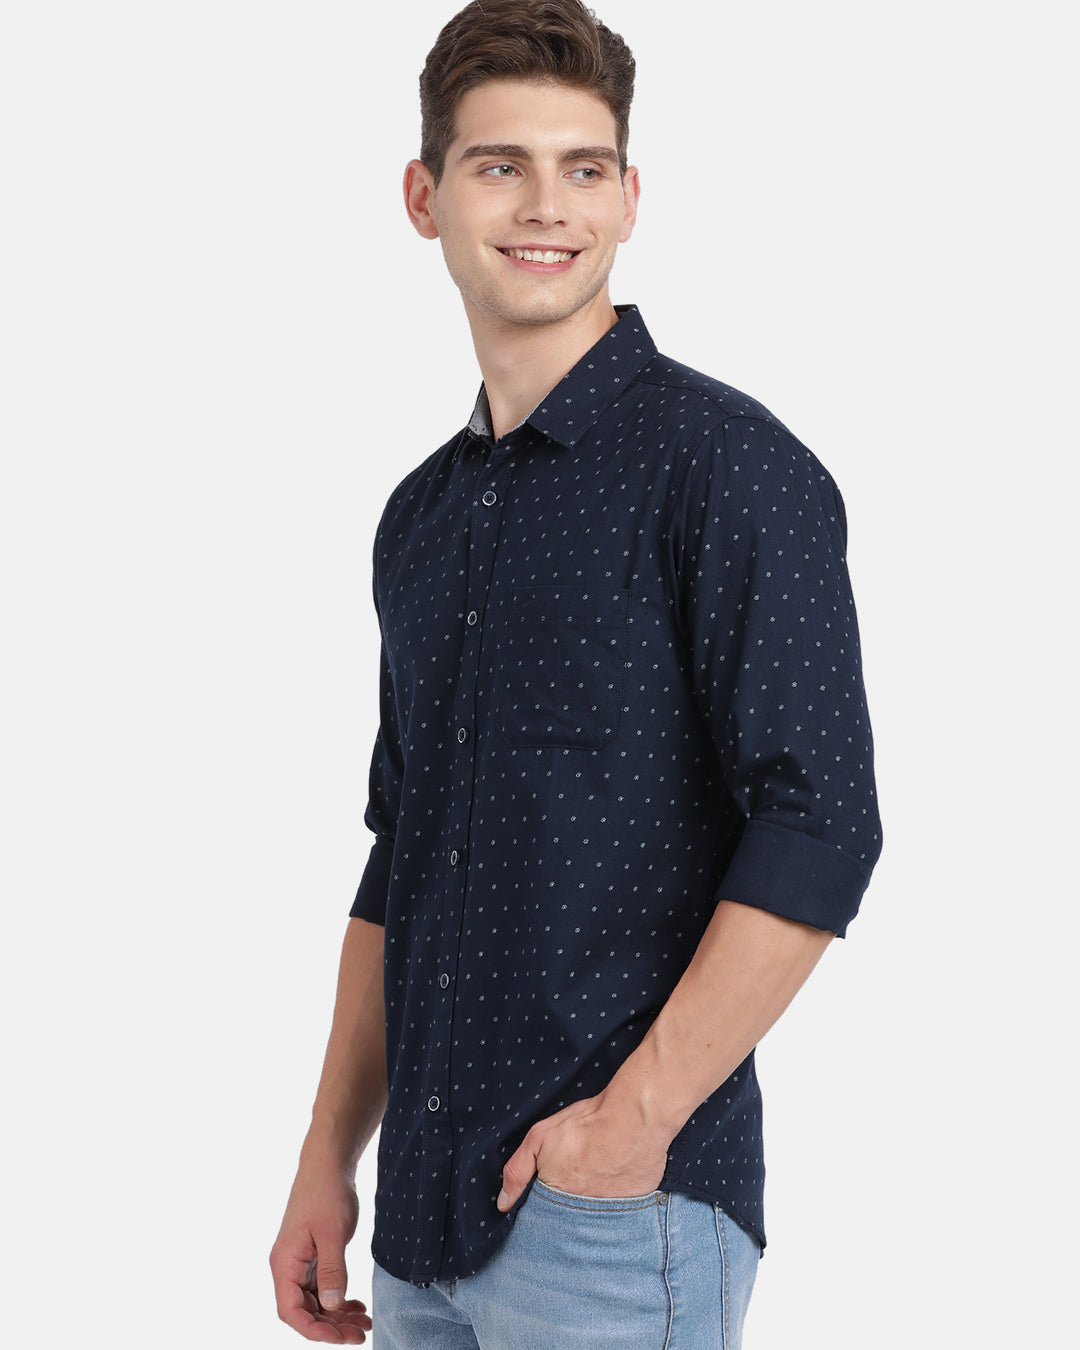 Crocodile Men's Casual Full Sleeve Slim Fit Printed Navy With Collar Shirt Online